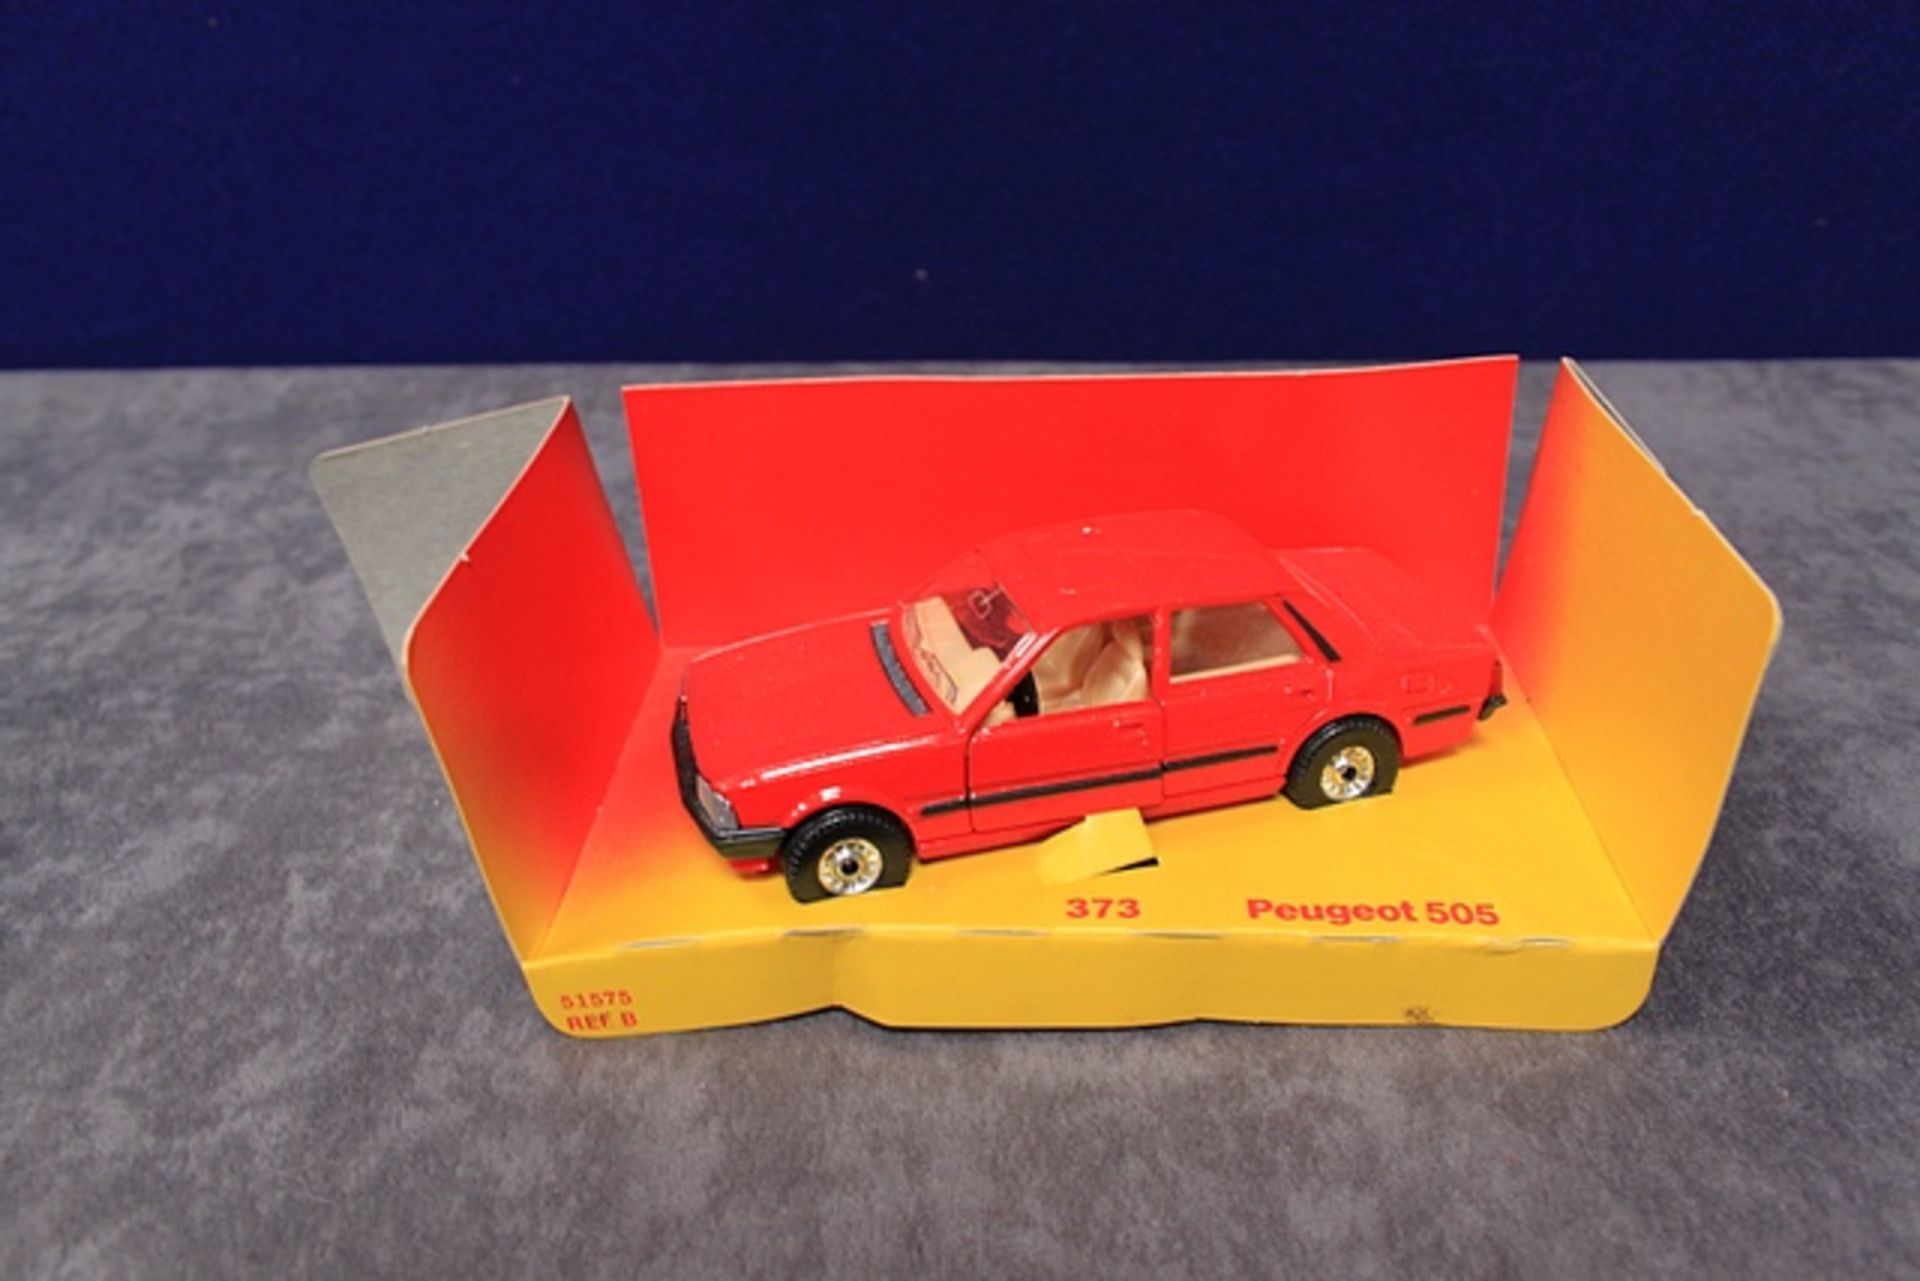 Corgi Diecast Number 373 Peugeot 505 With Very Good Box - Image 2 of 2